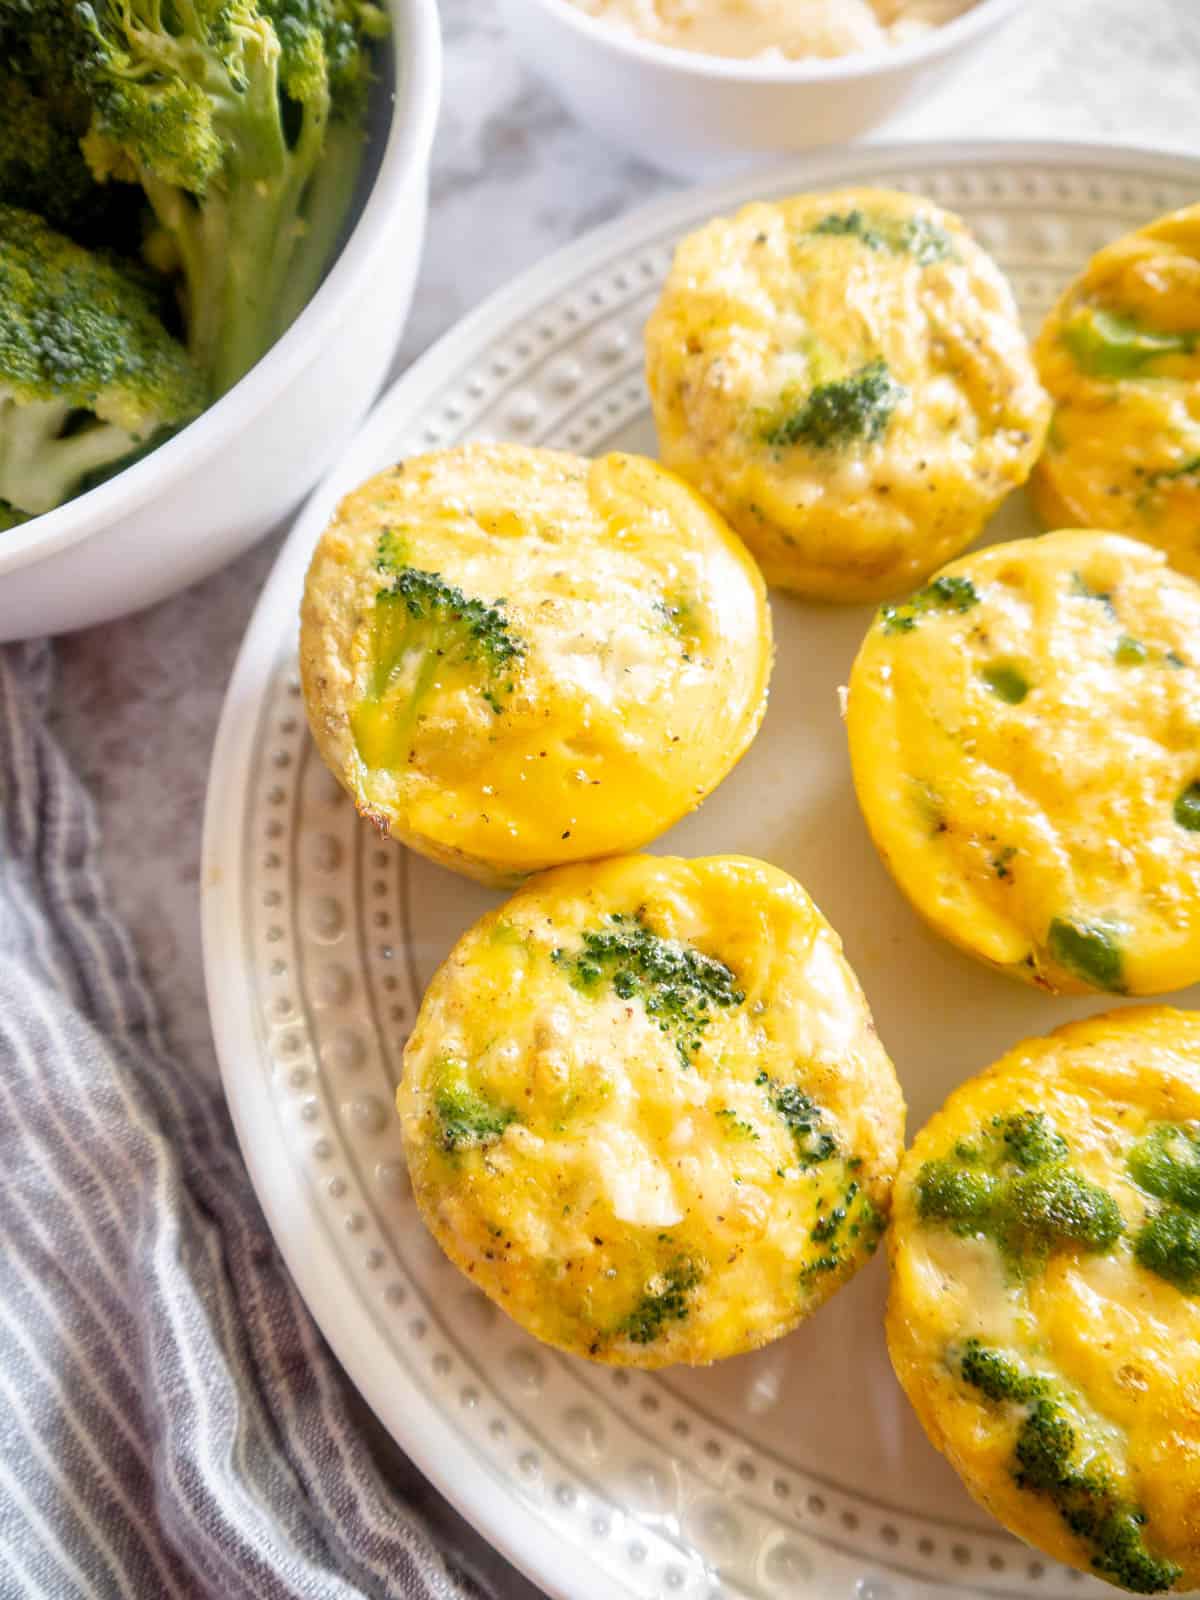 Broccoli egg muffins on a plate.